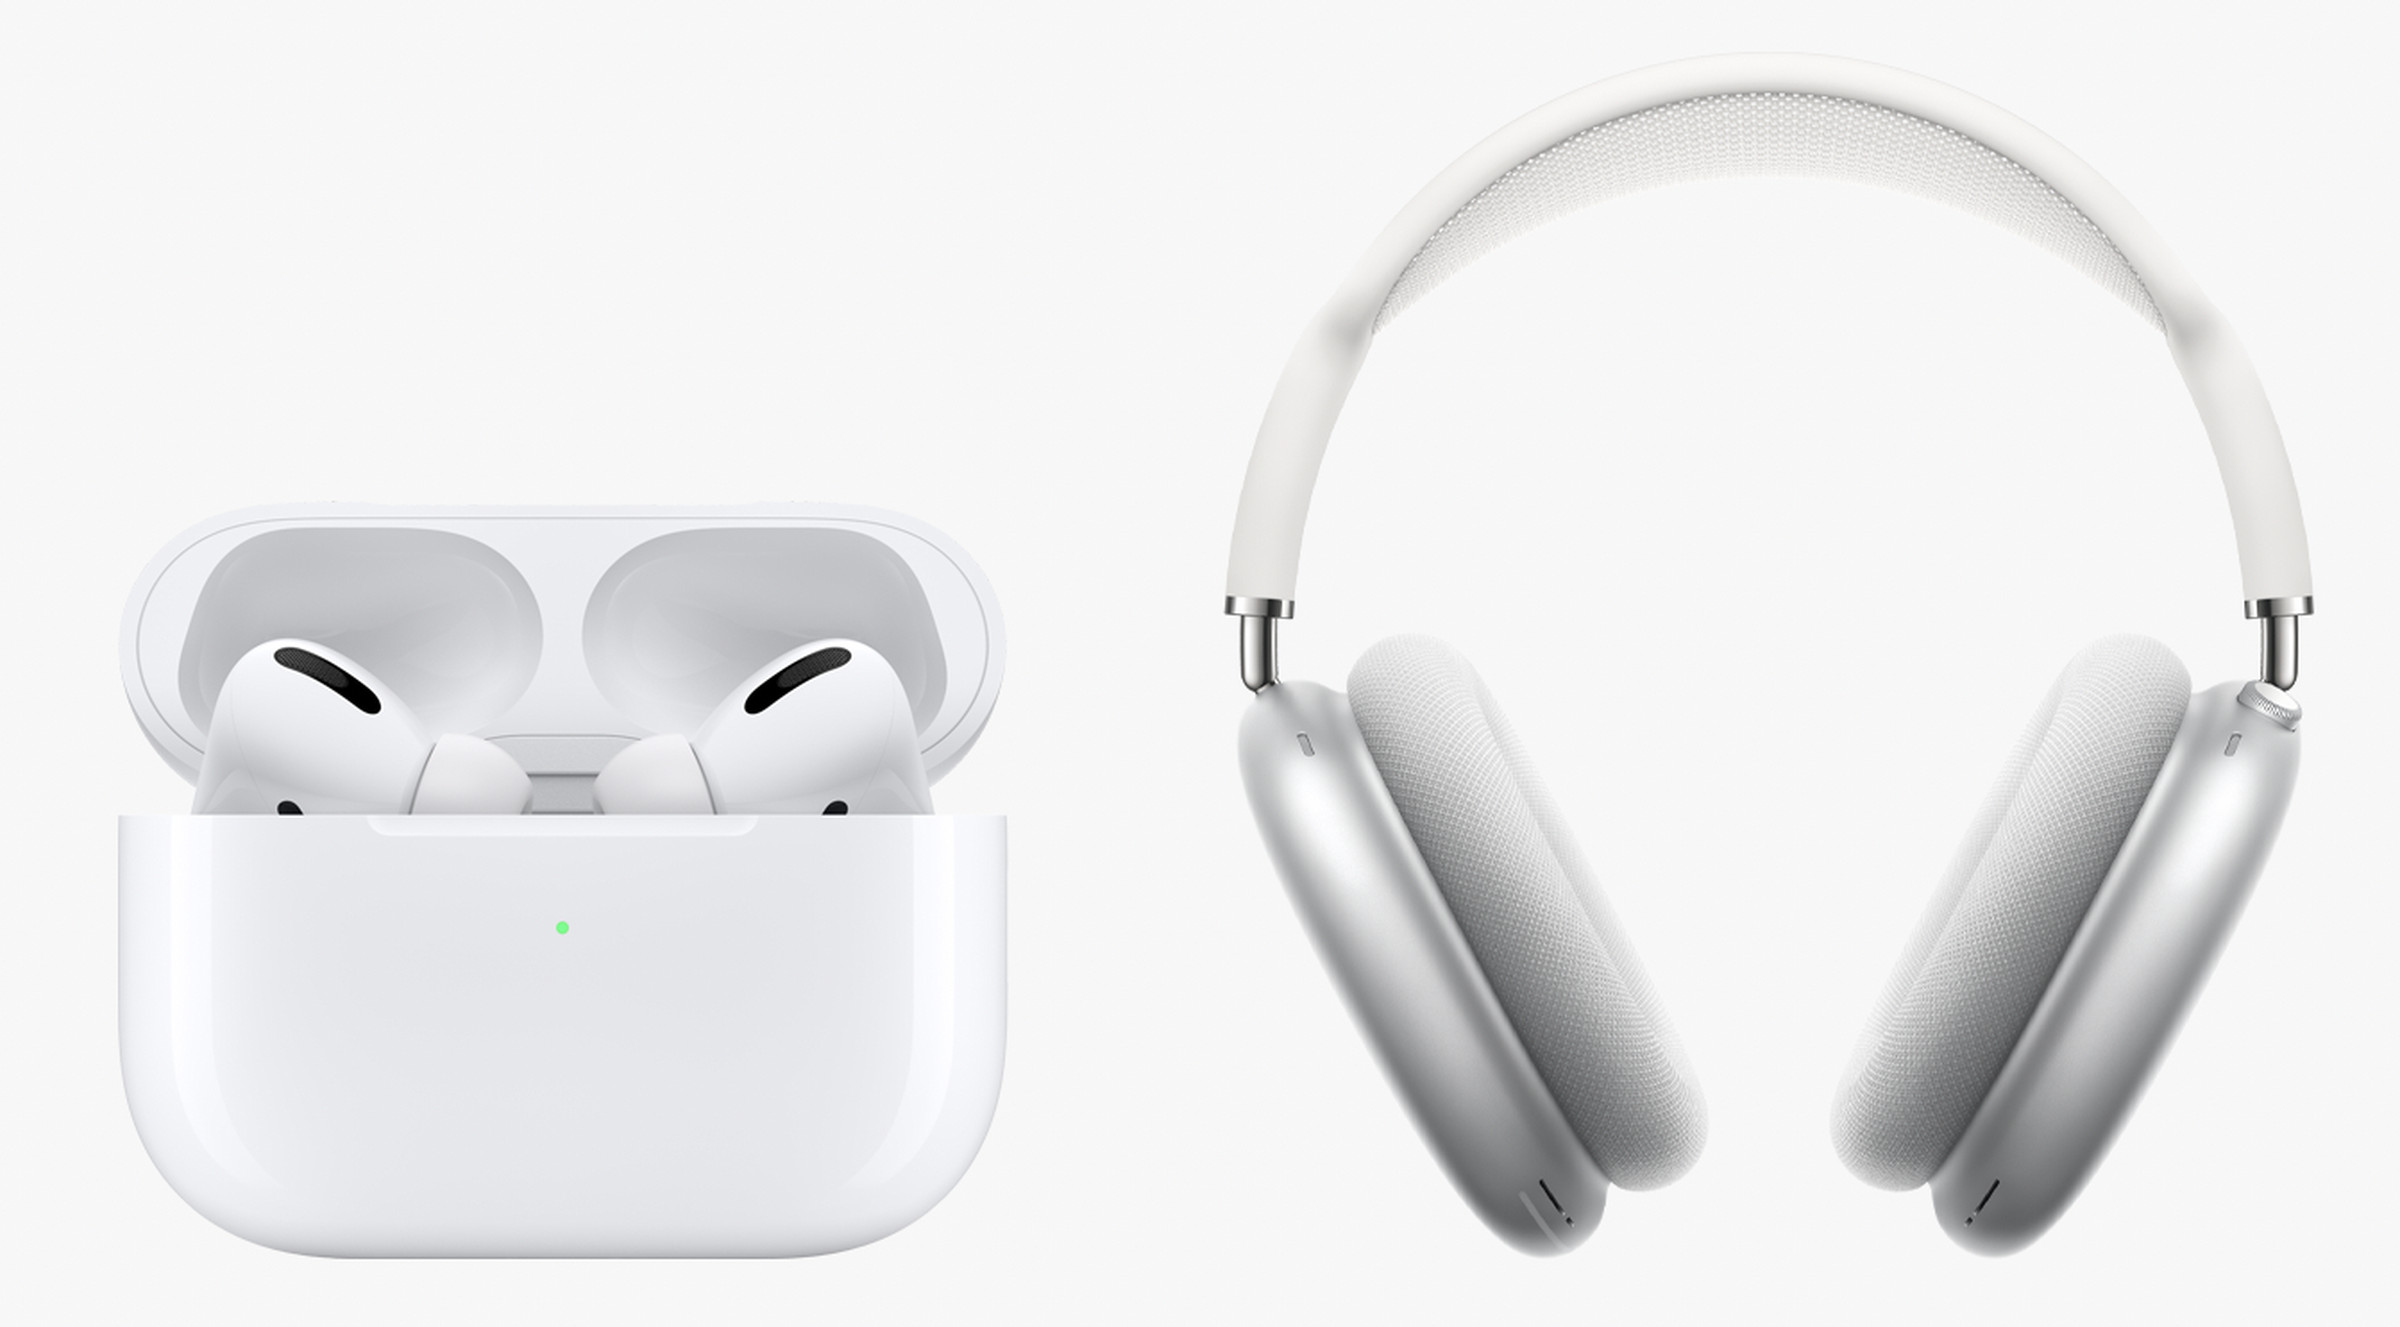 The AirPods Pro versus the AirPods Max.